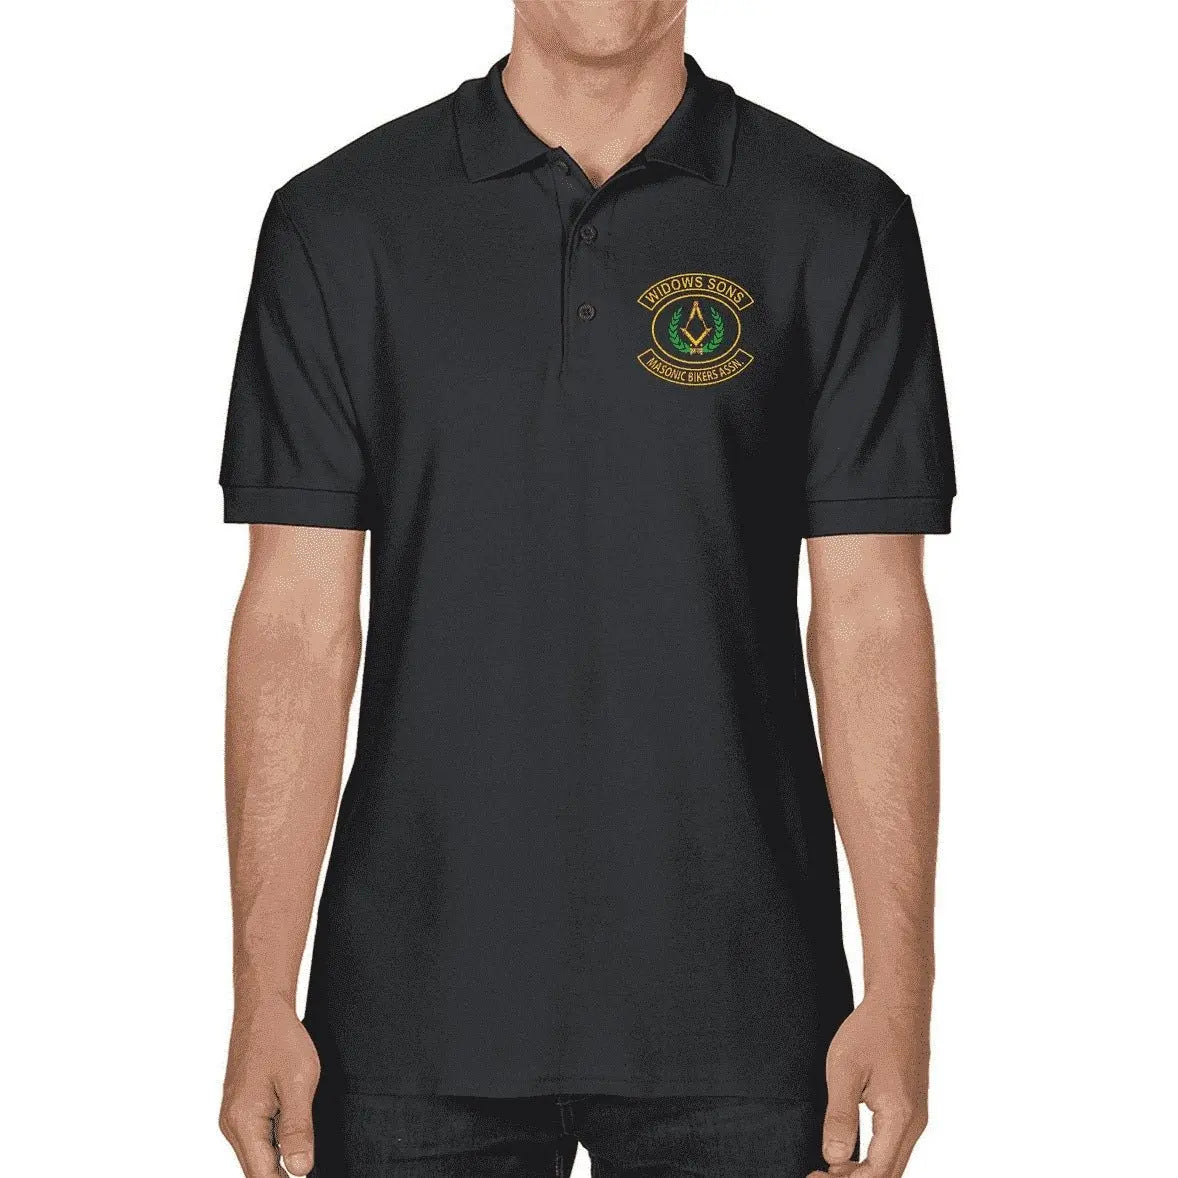 Widows Sons Embroidered Polo Shirt redplume